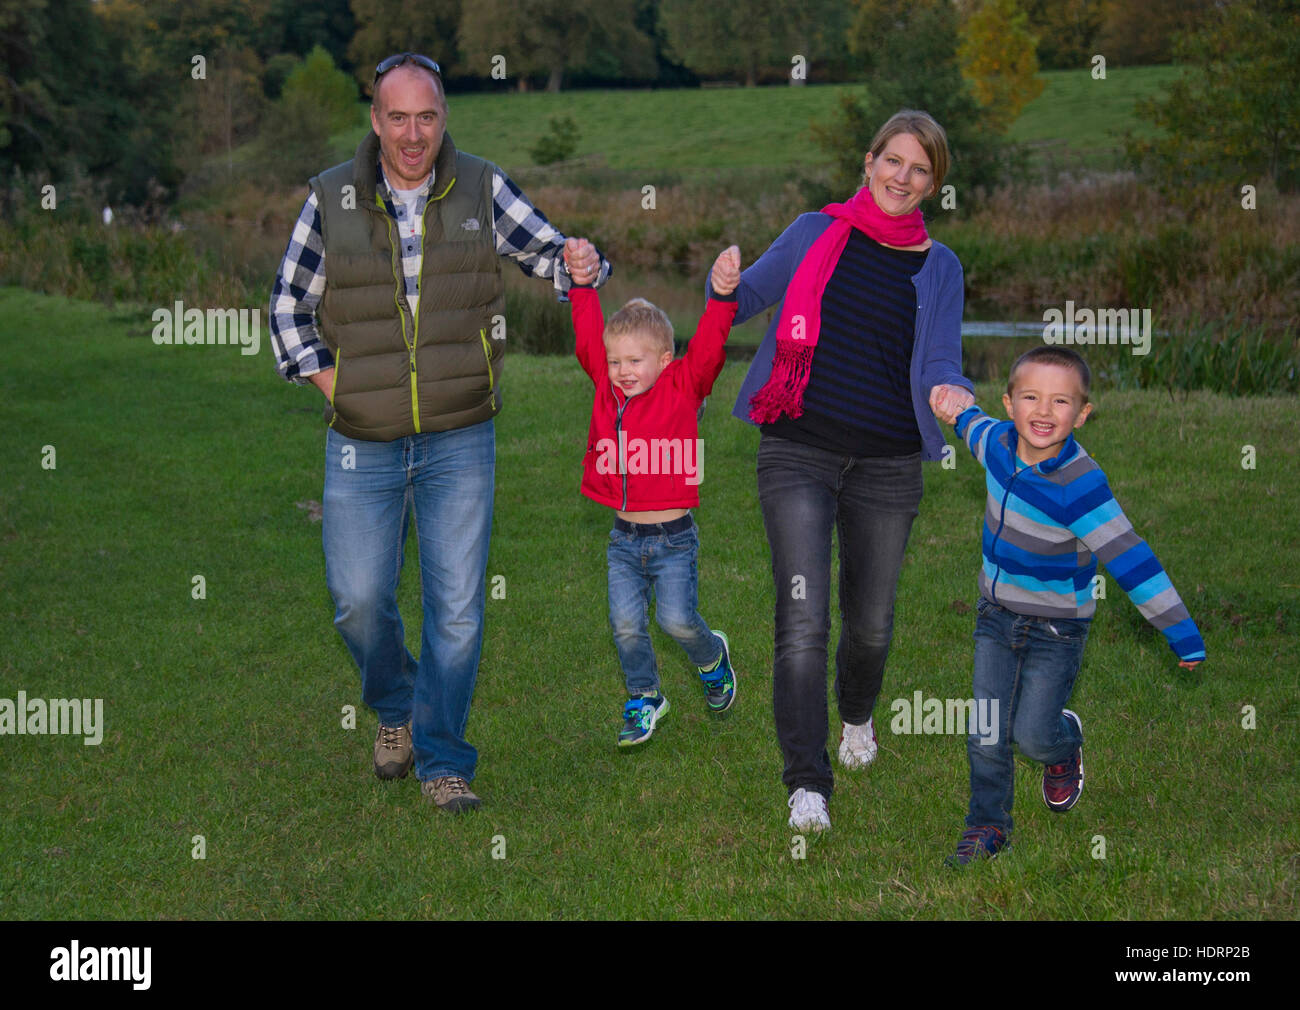 A young family with mother, father and 2 young boys, walking in the countryside. Stock Photo